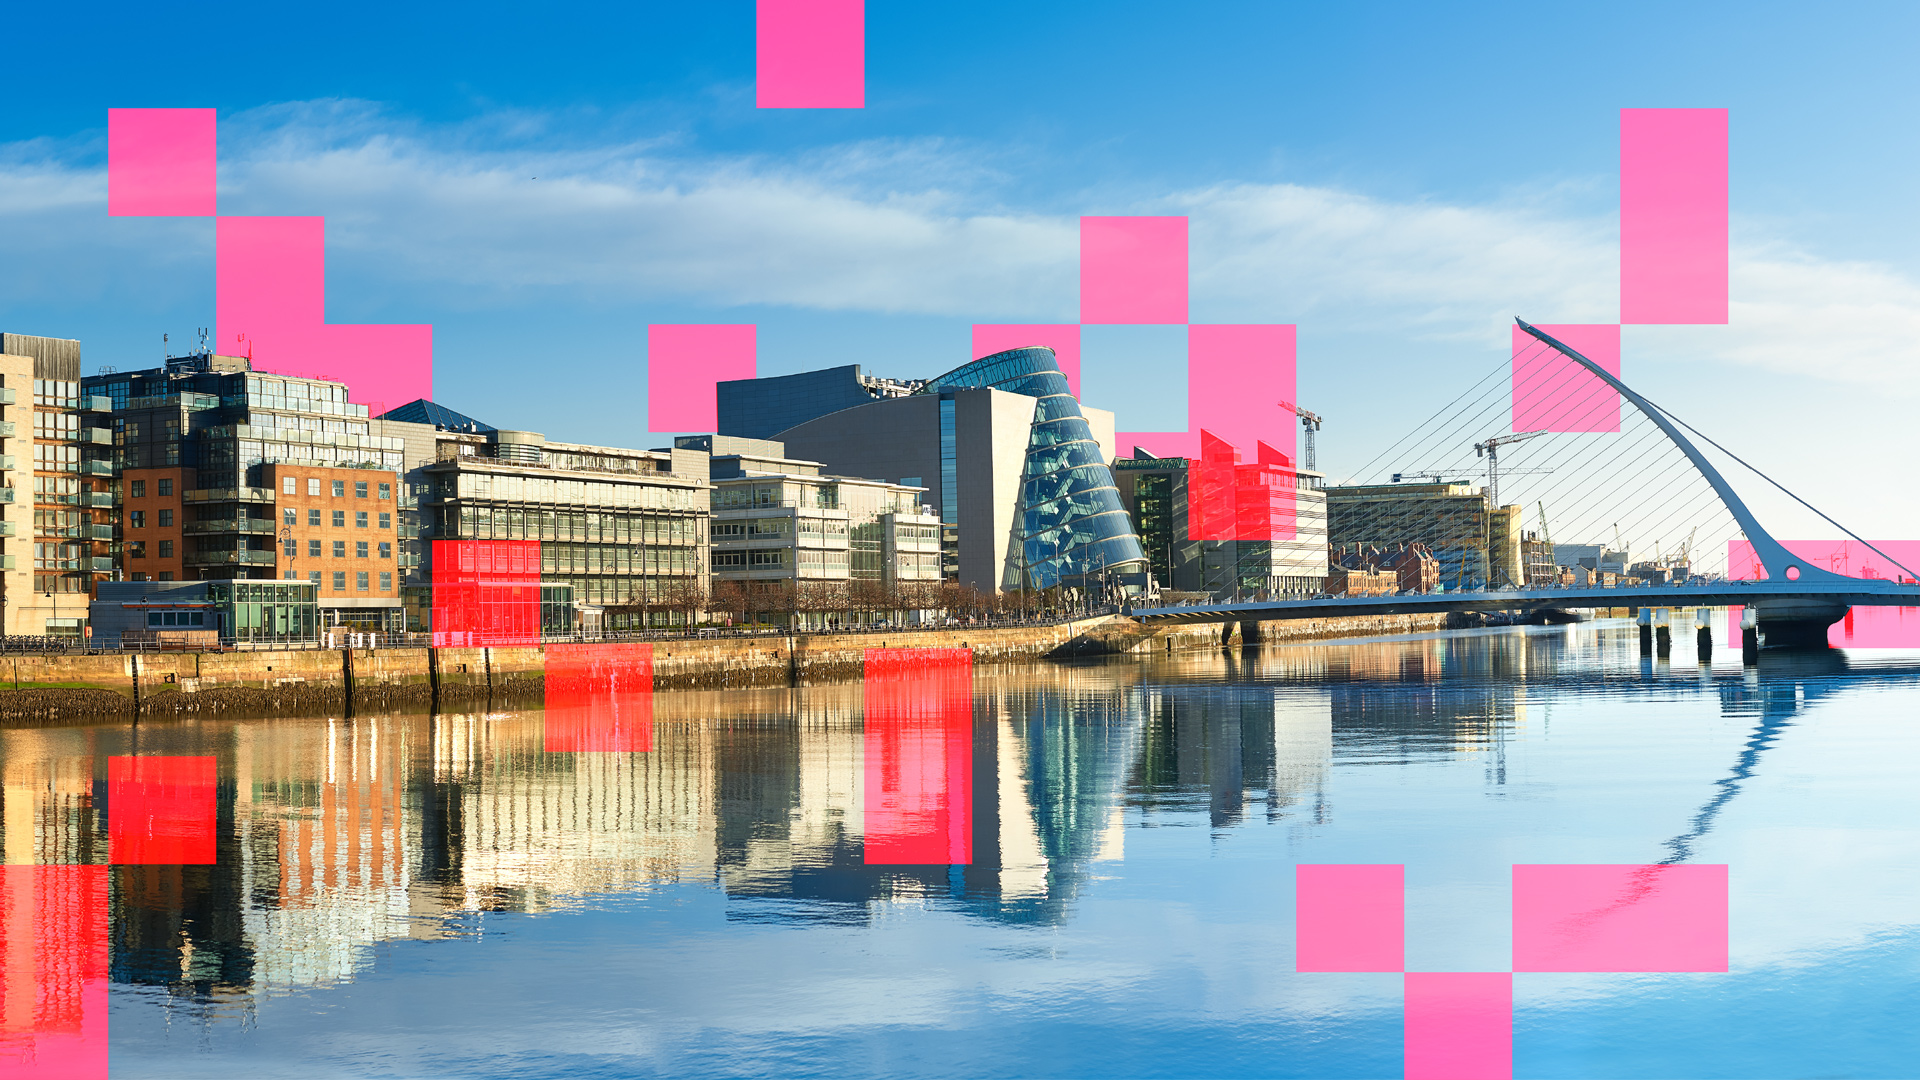 Landscape photo of the Dublin skyline with coral squares collaged over the top